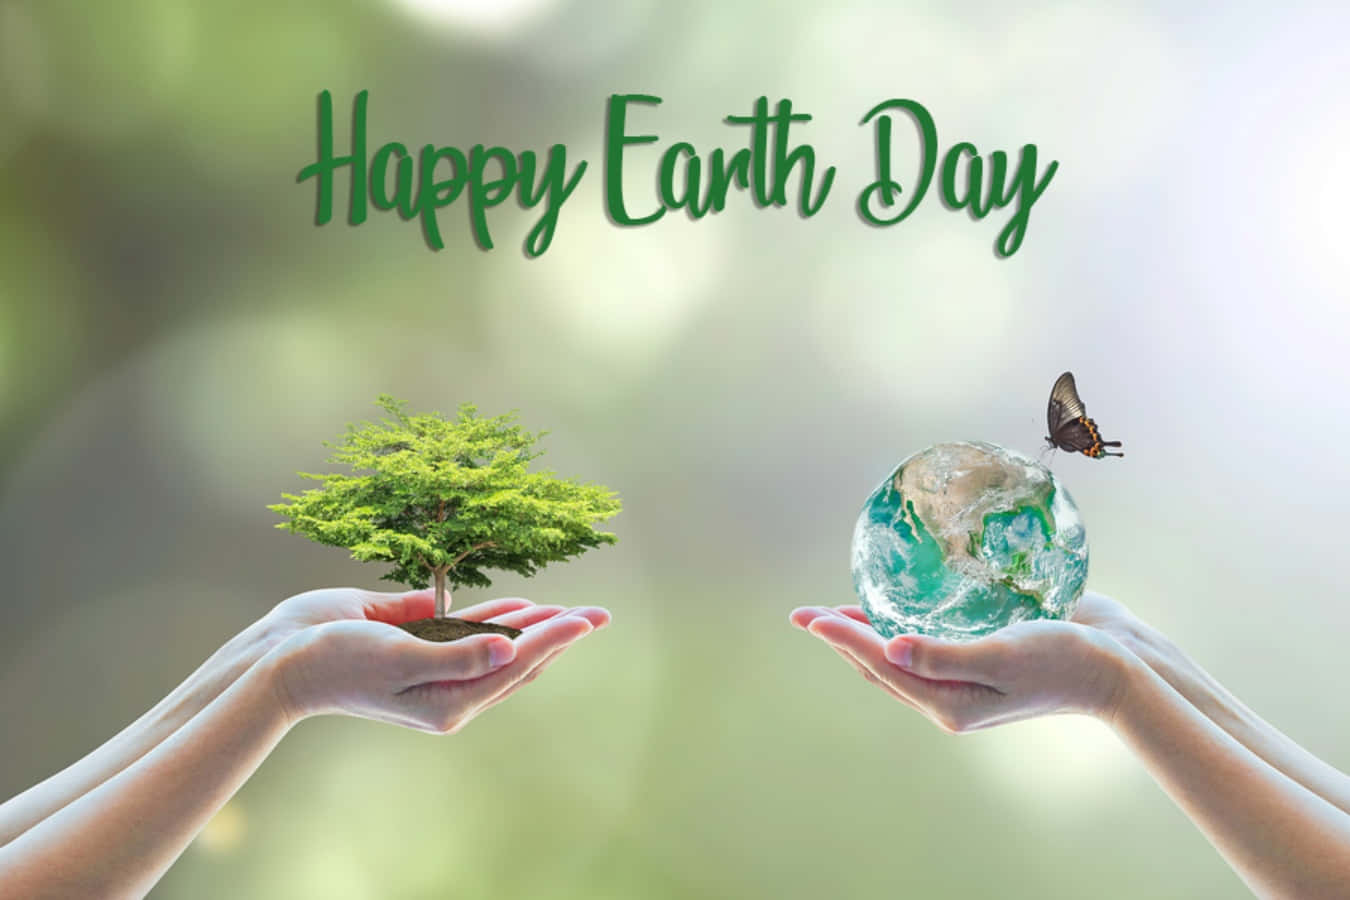 Celebrate Earth day and its significance on April 22nd